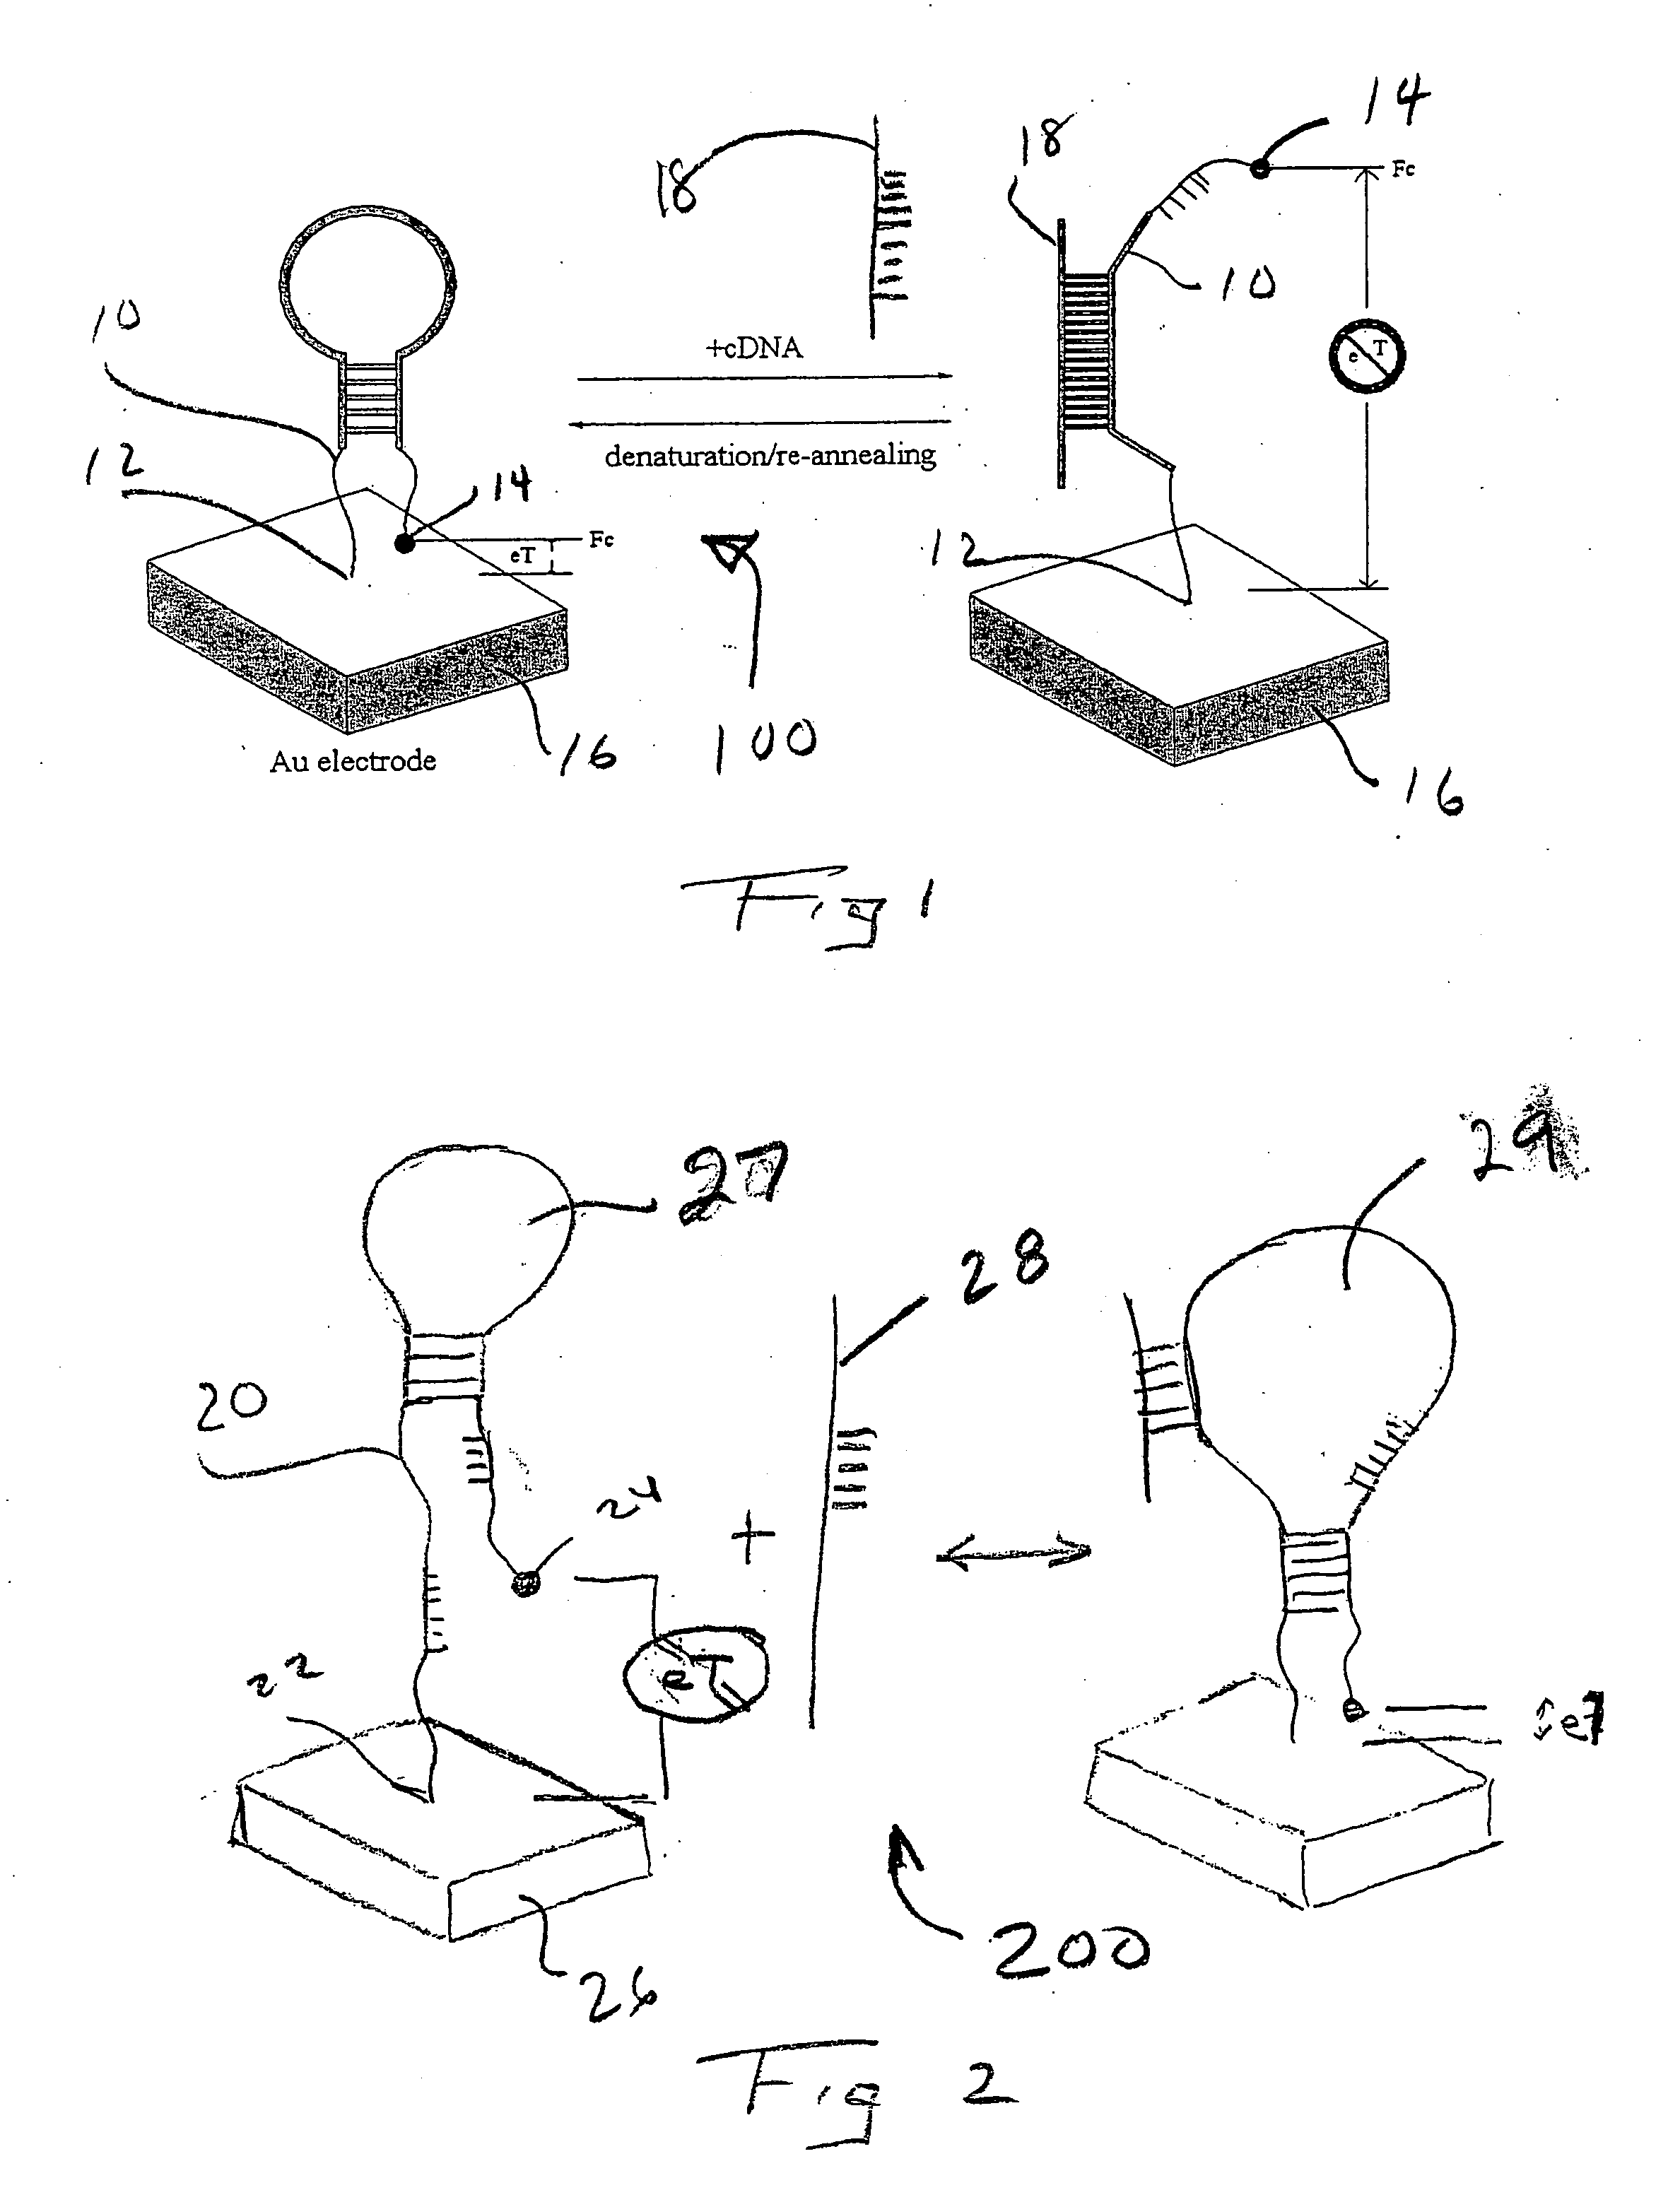 Reagentless, reusable bioelectronic detectors and their use as authentication devices